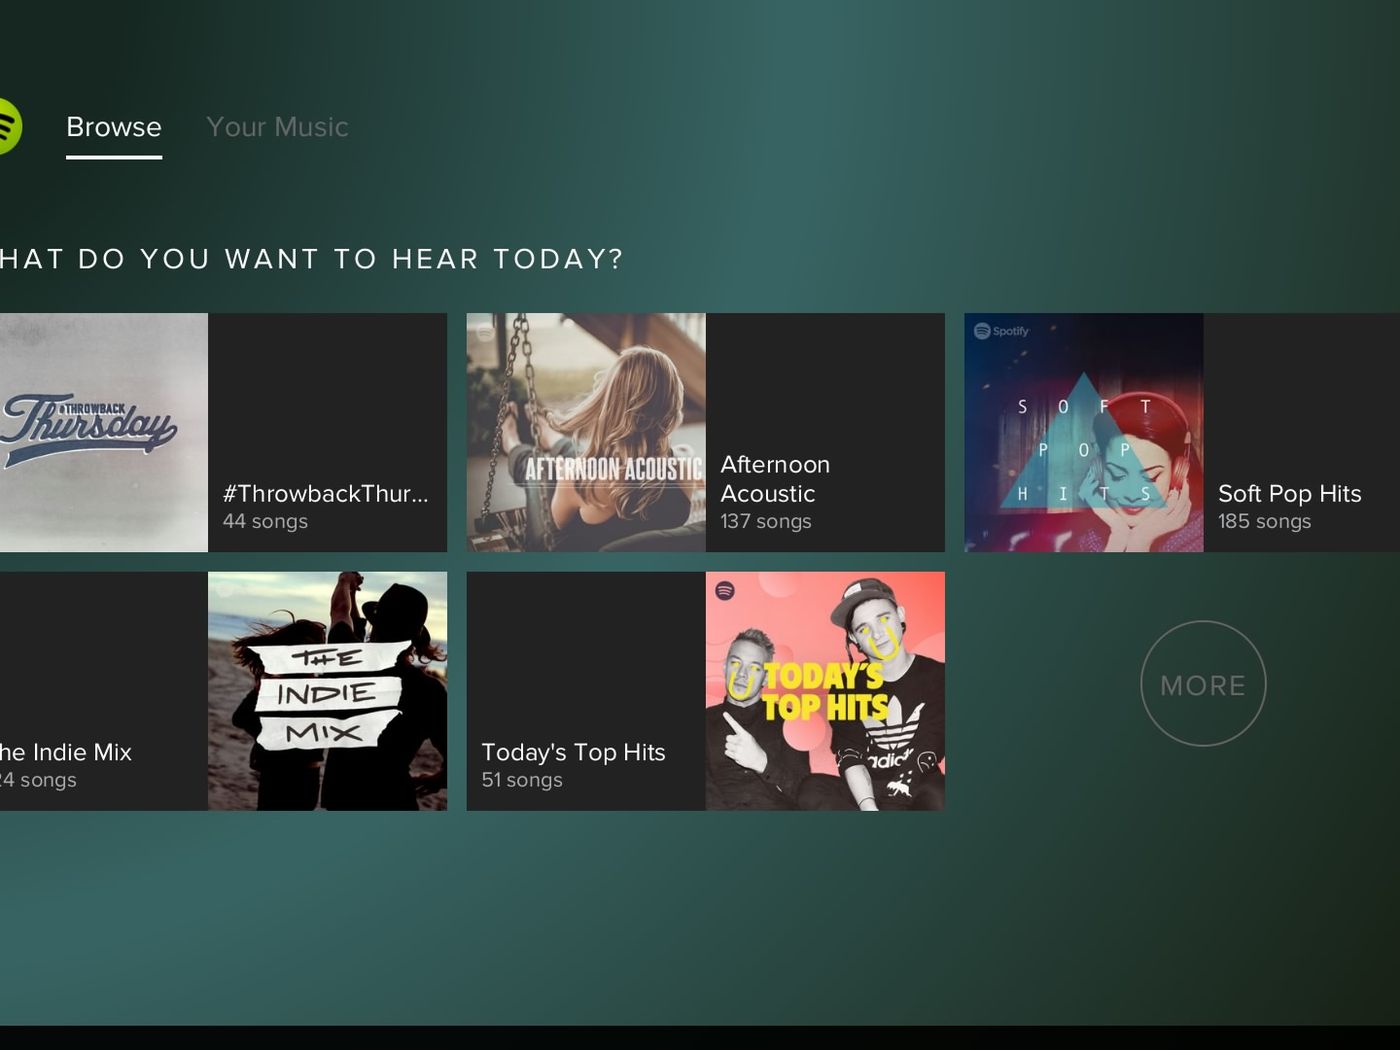 Spotify App Not Appearing On Playstation 4 trustrenew